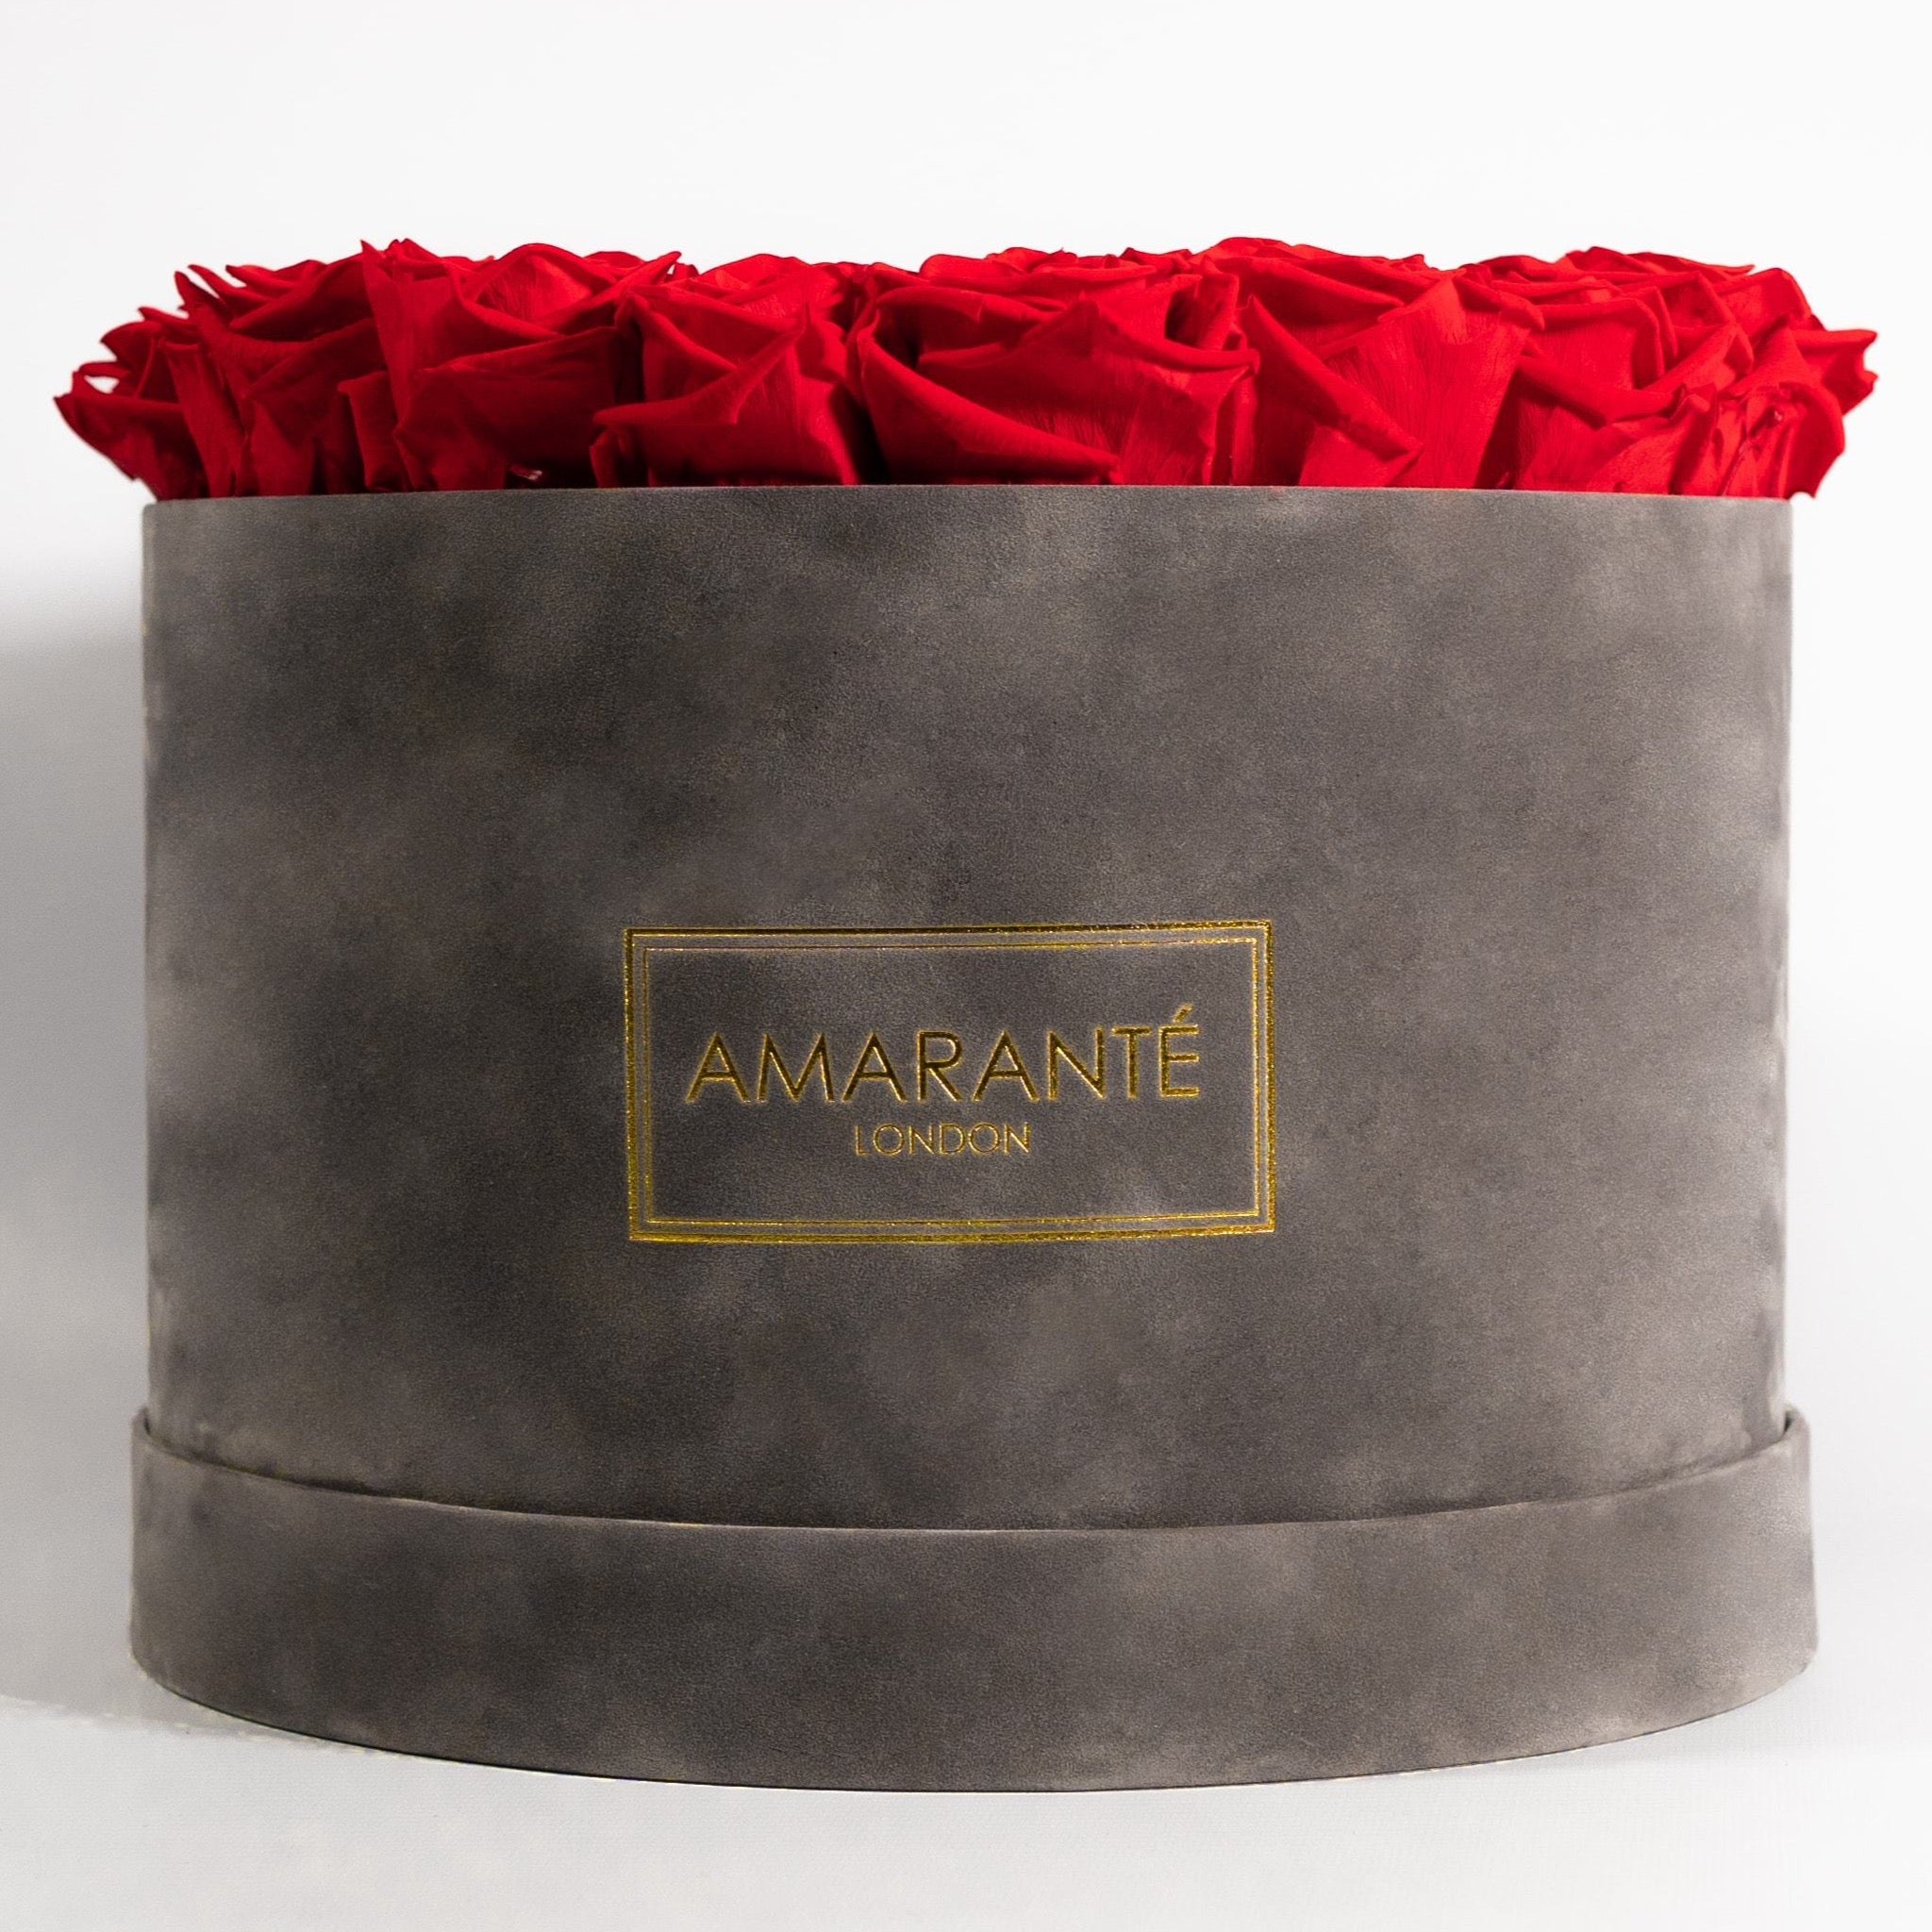 Majestic red roses denoting love, romance, and courage. 